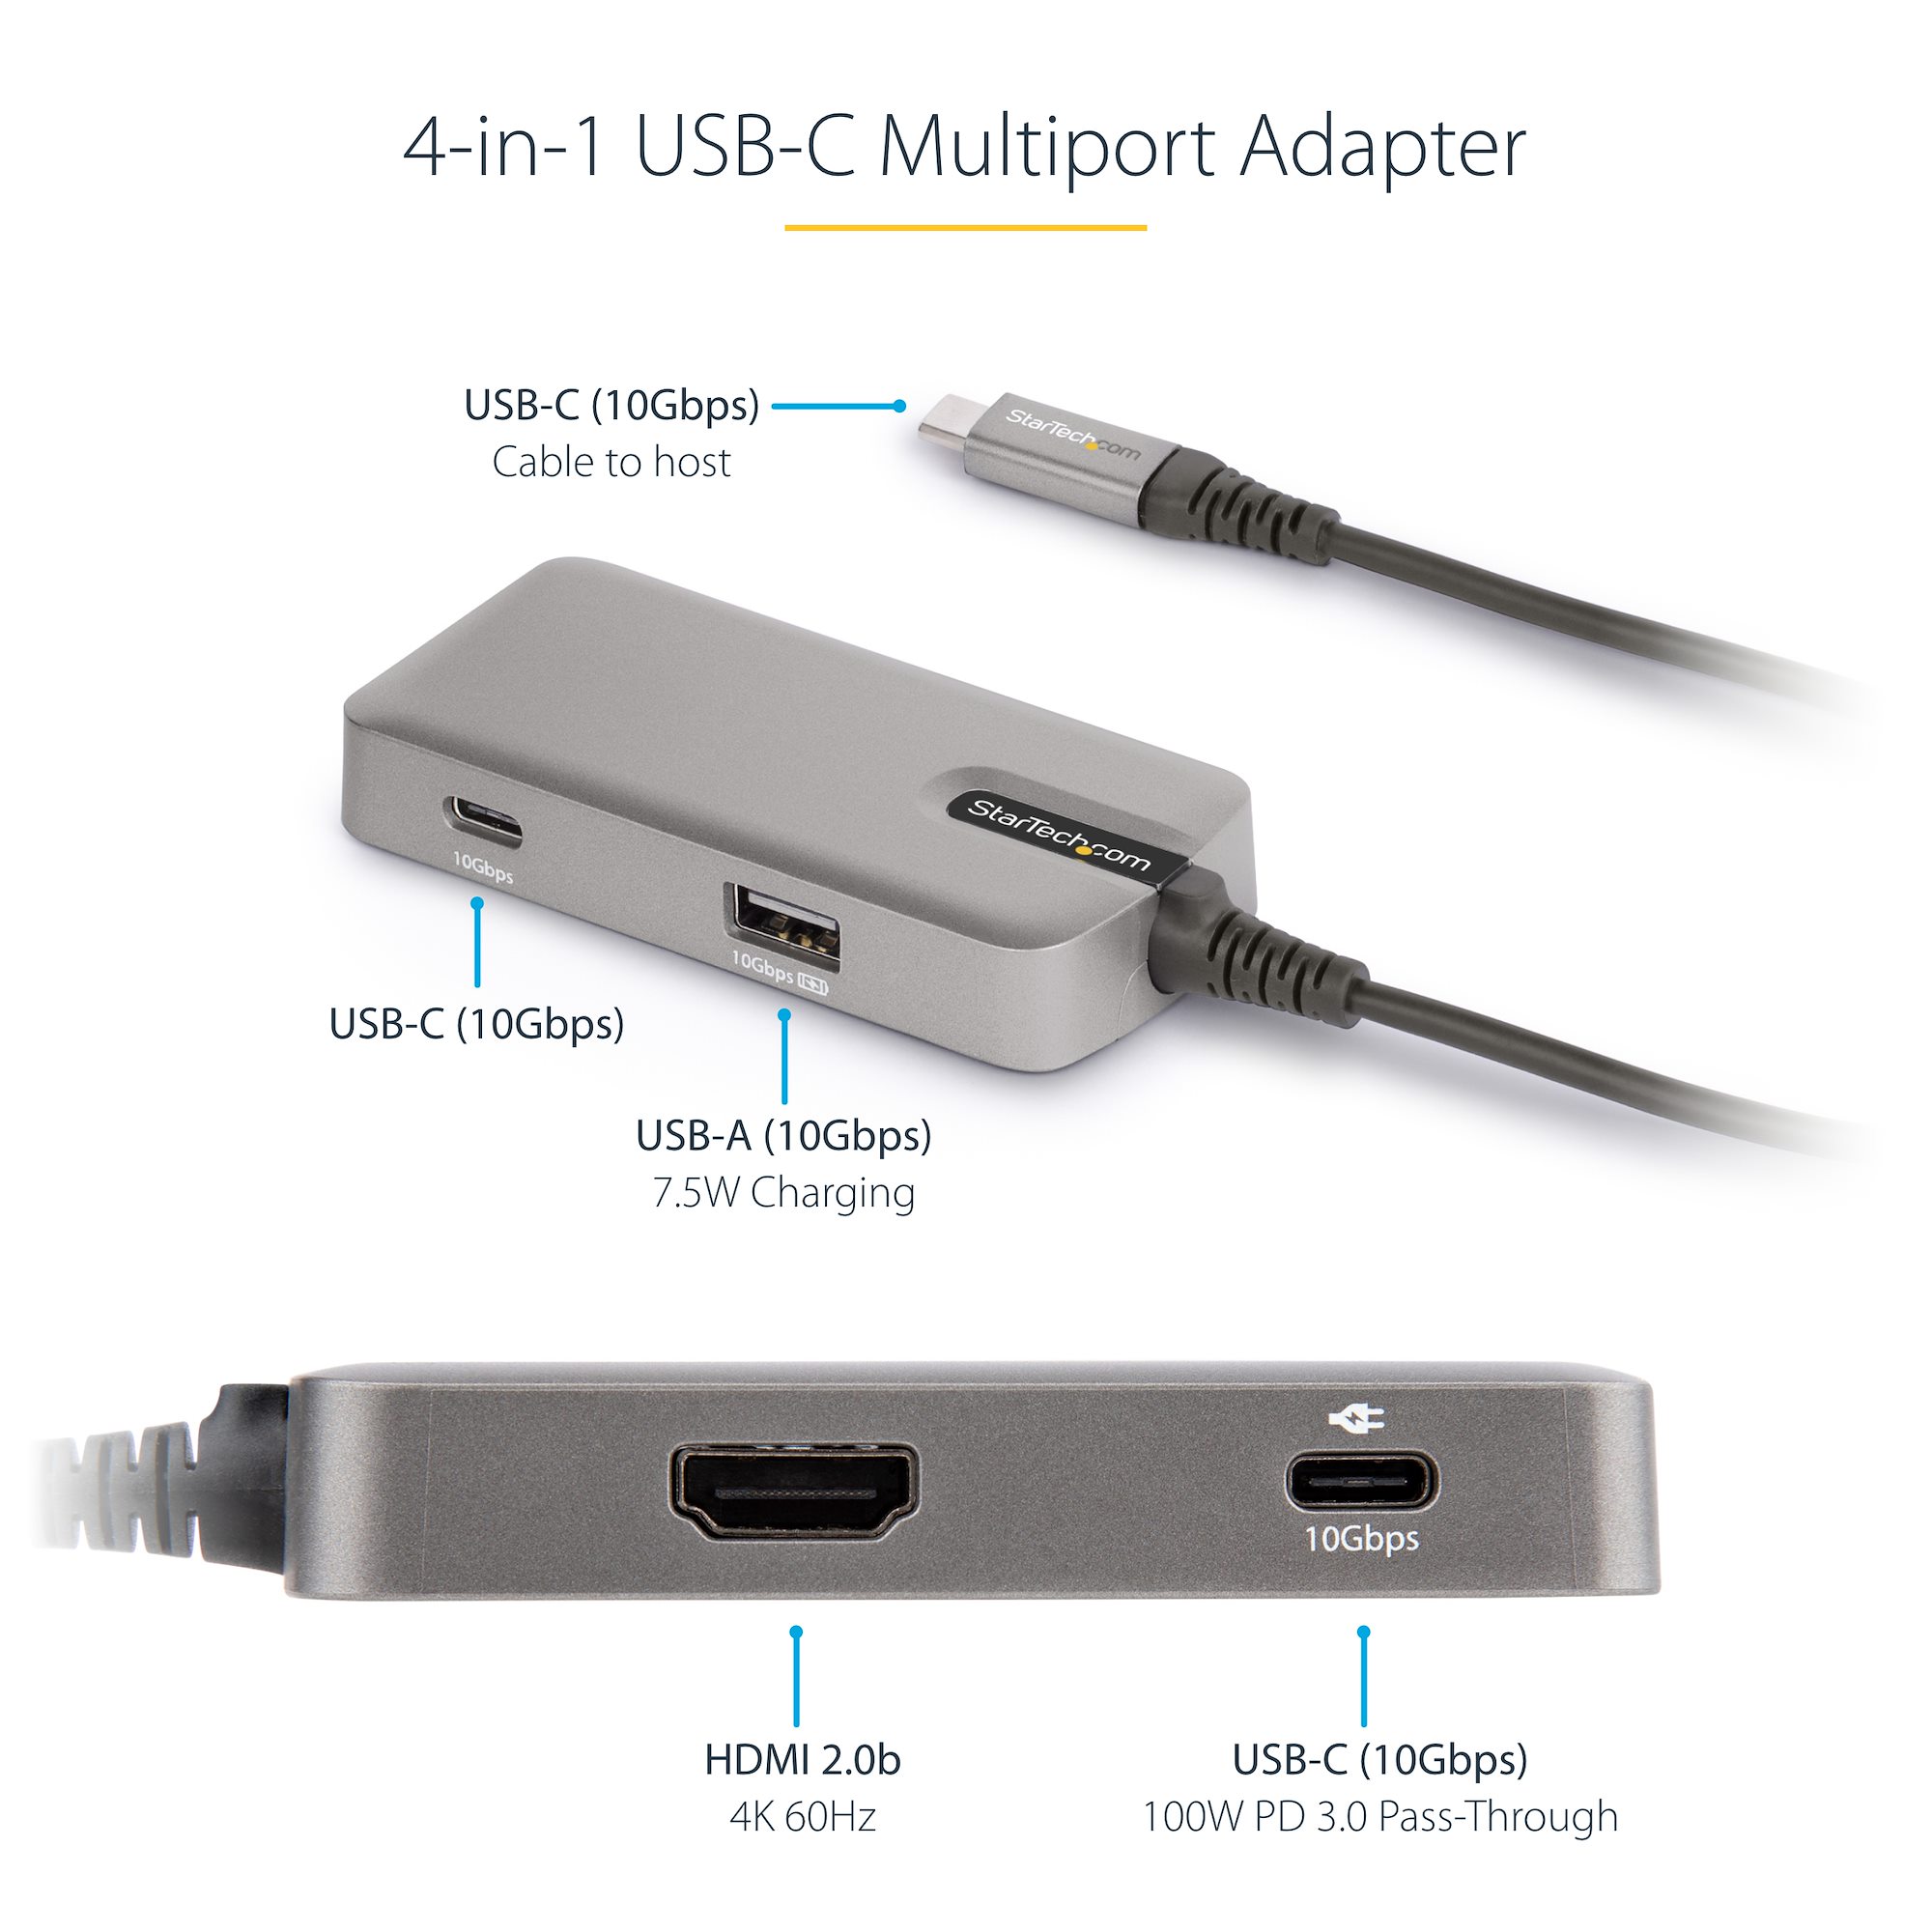 USB C Multiport Adapter - USB-C to 4K 60Hz HDMI 2.0, 100W Power Delivery  Pass-through - 3-Port 10Gbps USB Hub - Portable USB Type-C Mini Docking